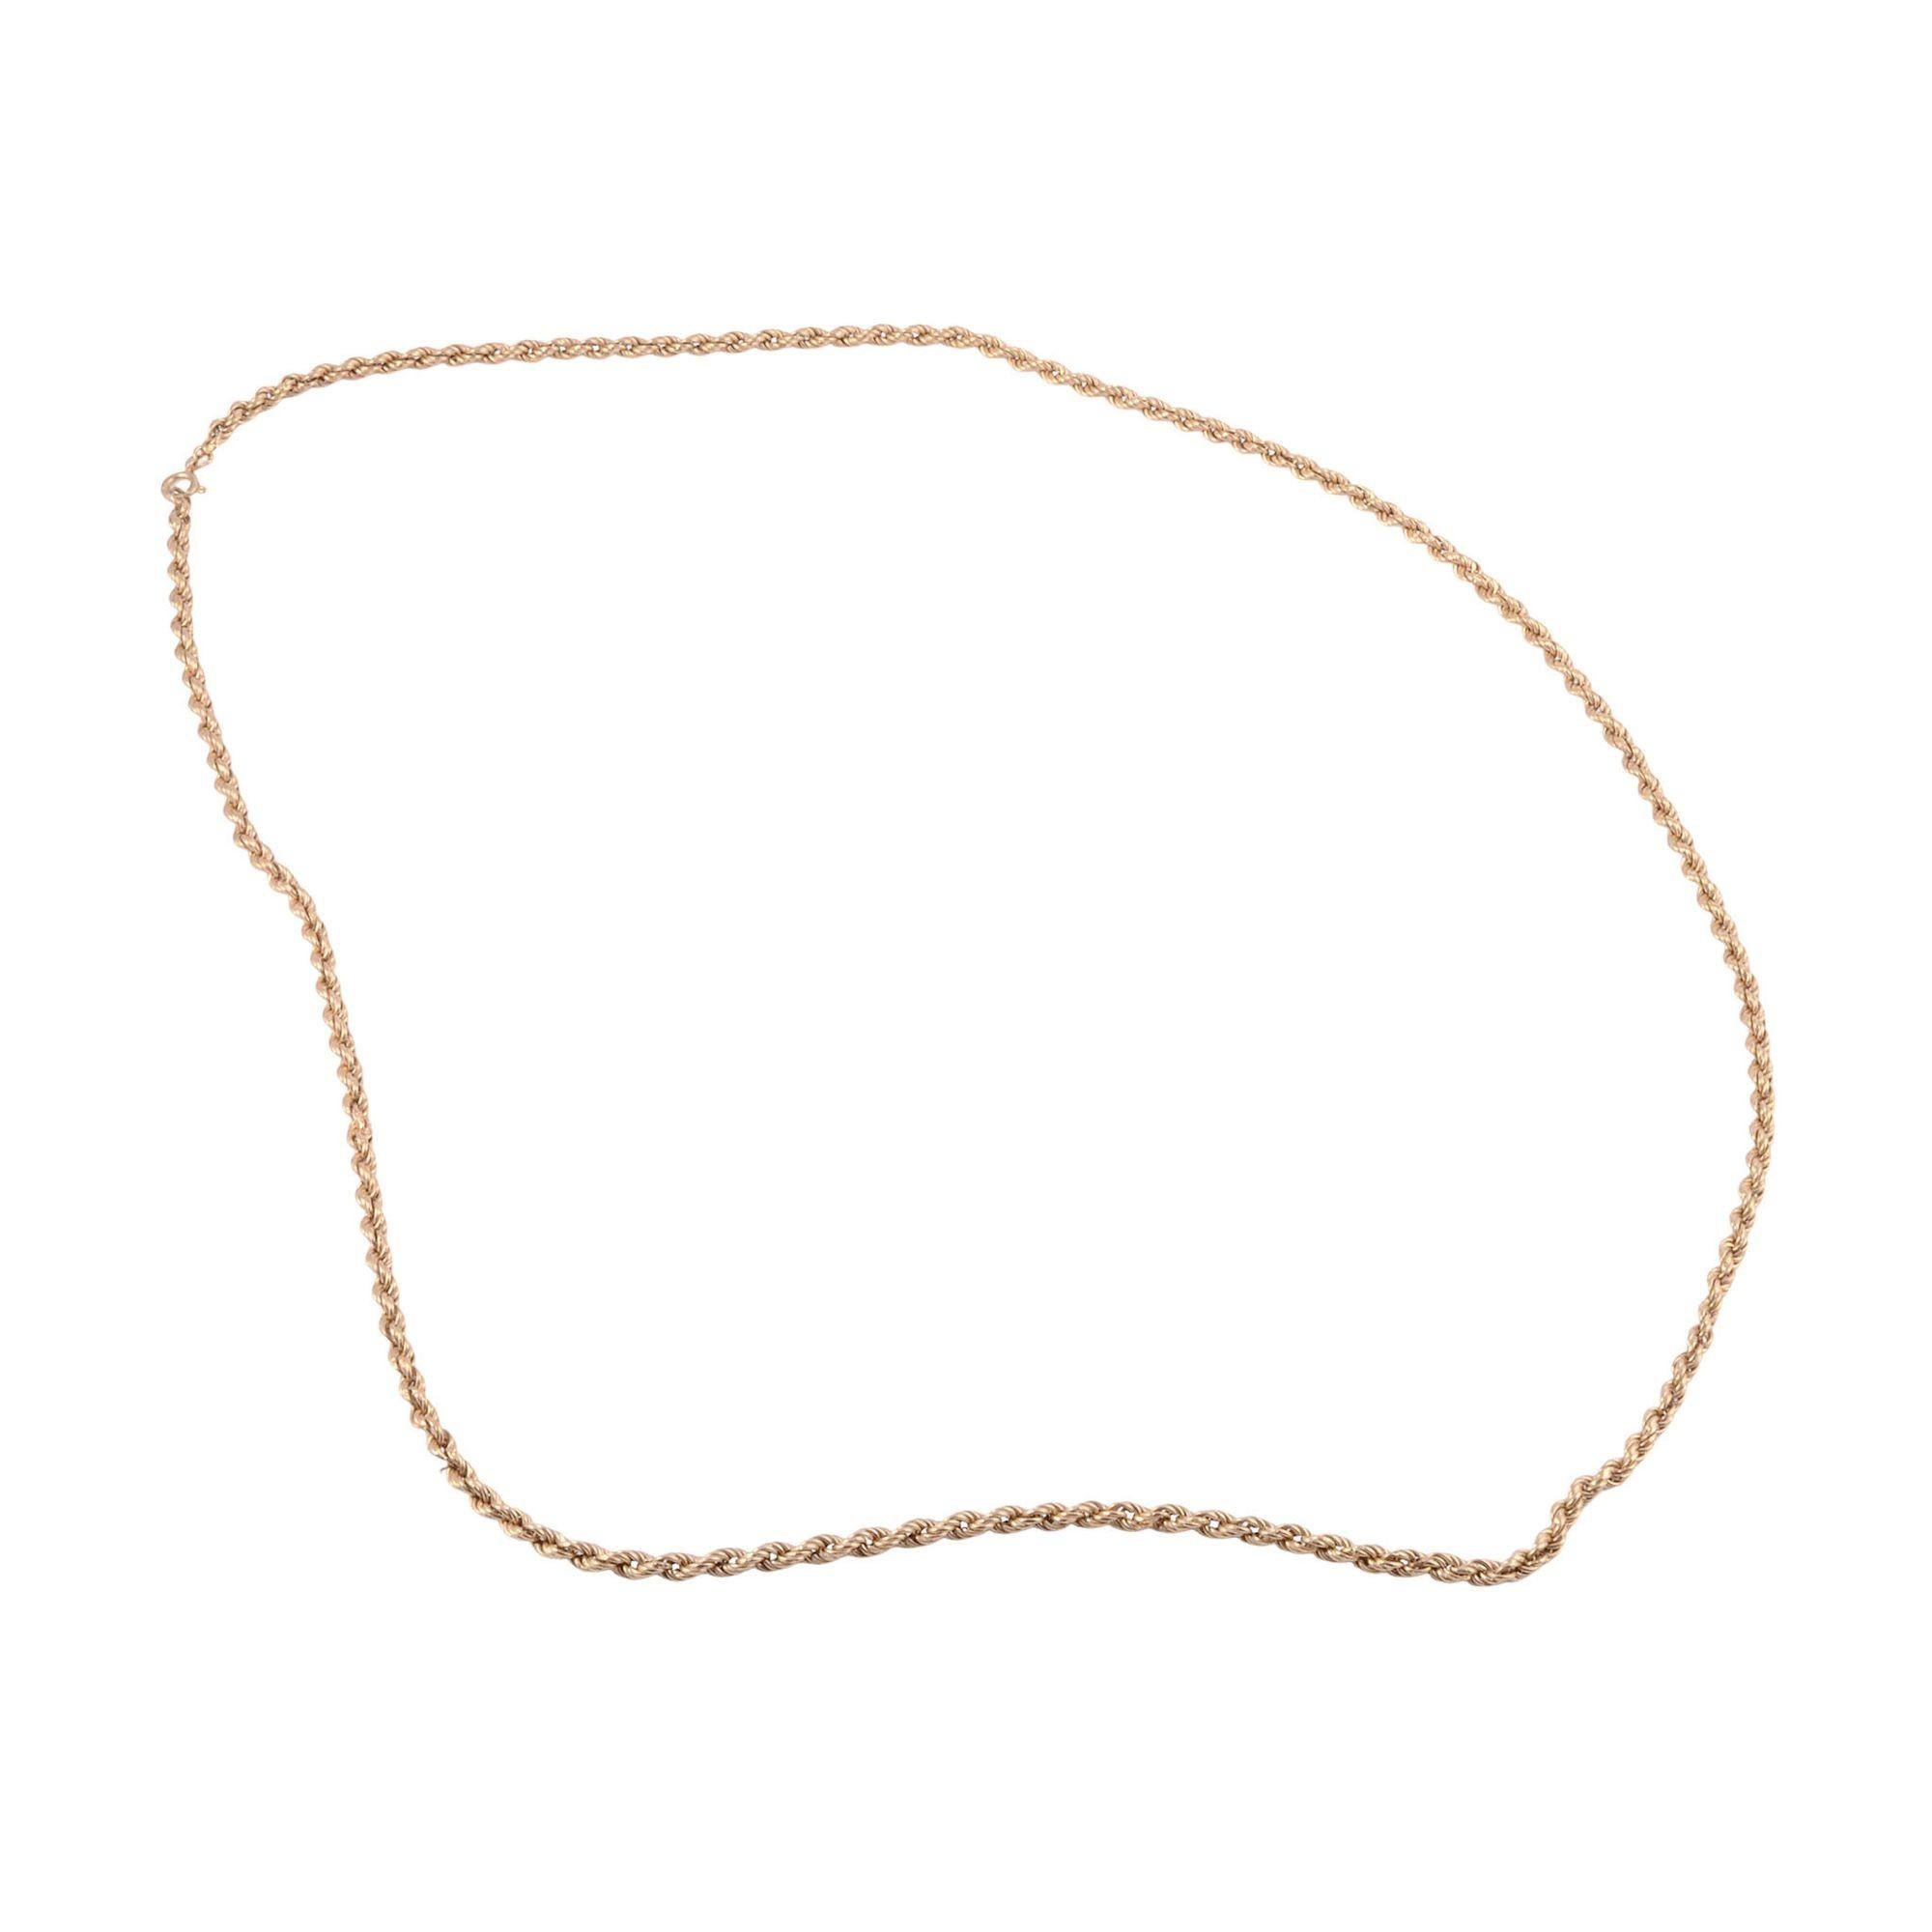 Estate 34 inch 14 karat gold rope chain. This rope style chain is crafted in 14 karat gold with a lighter color. It measures 34 inches long and weighs 17.2 grams. [KIMH 1902 P]
 
Dimensions
34″L